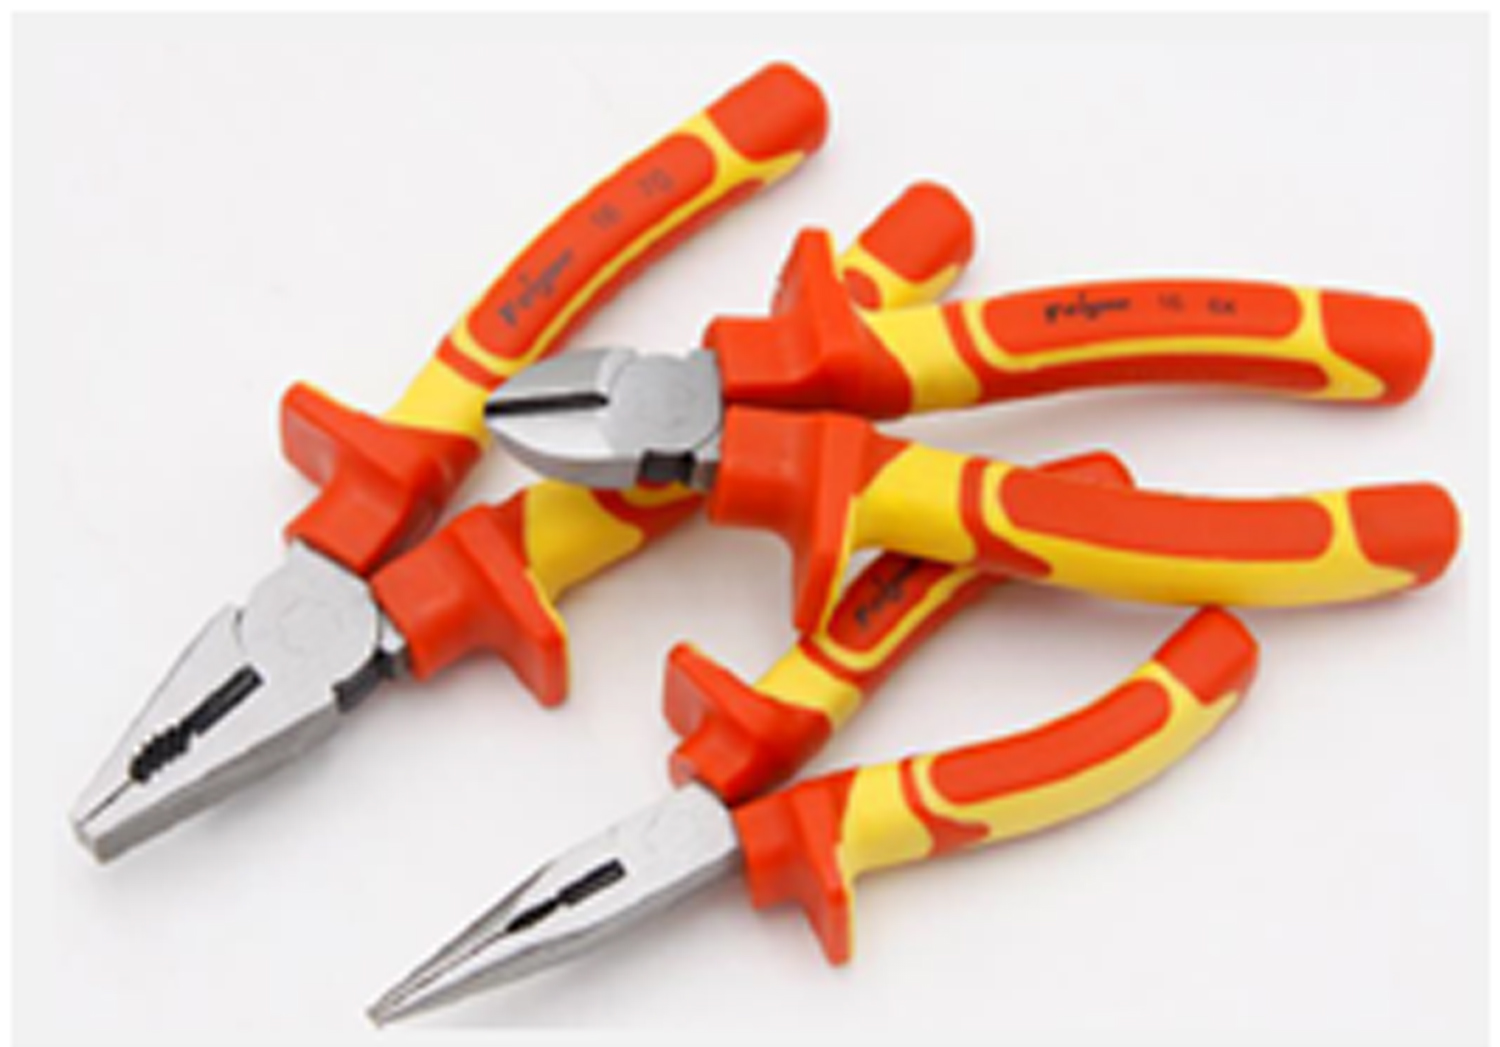 Insulated pliers series,1000volt